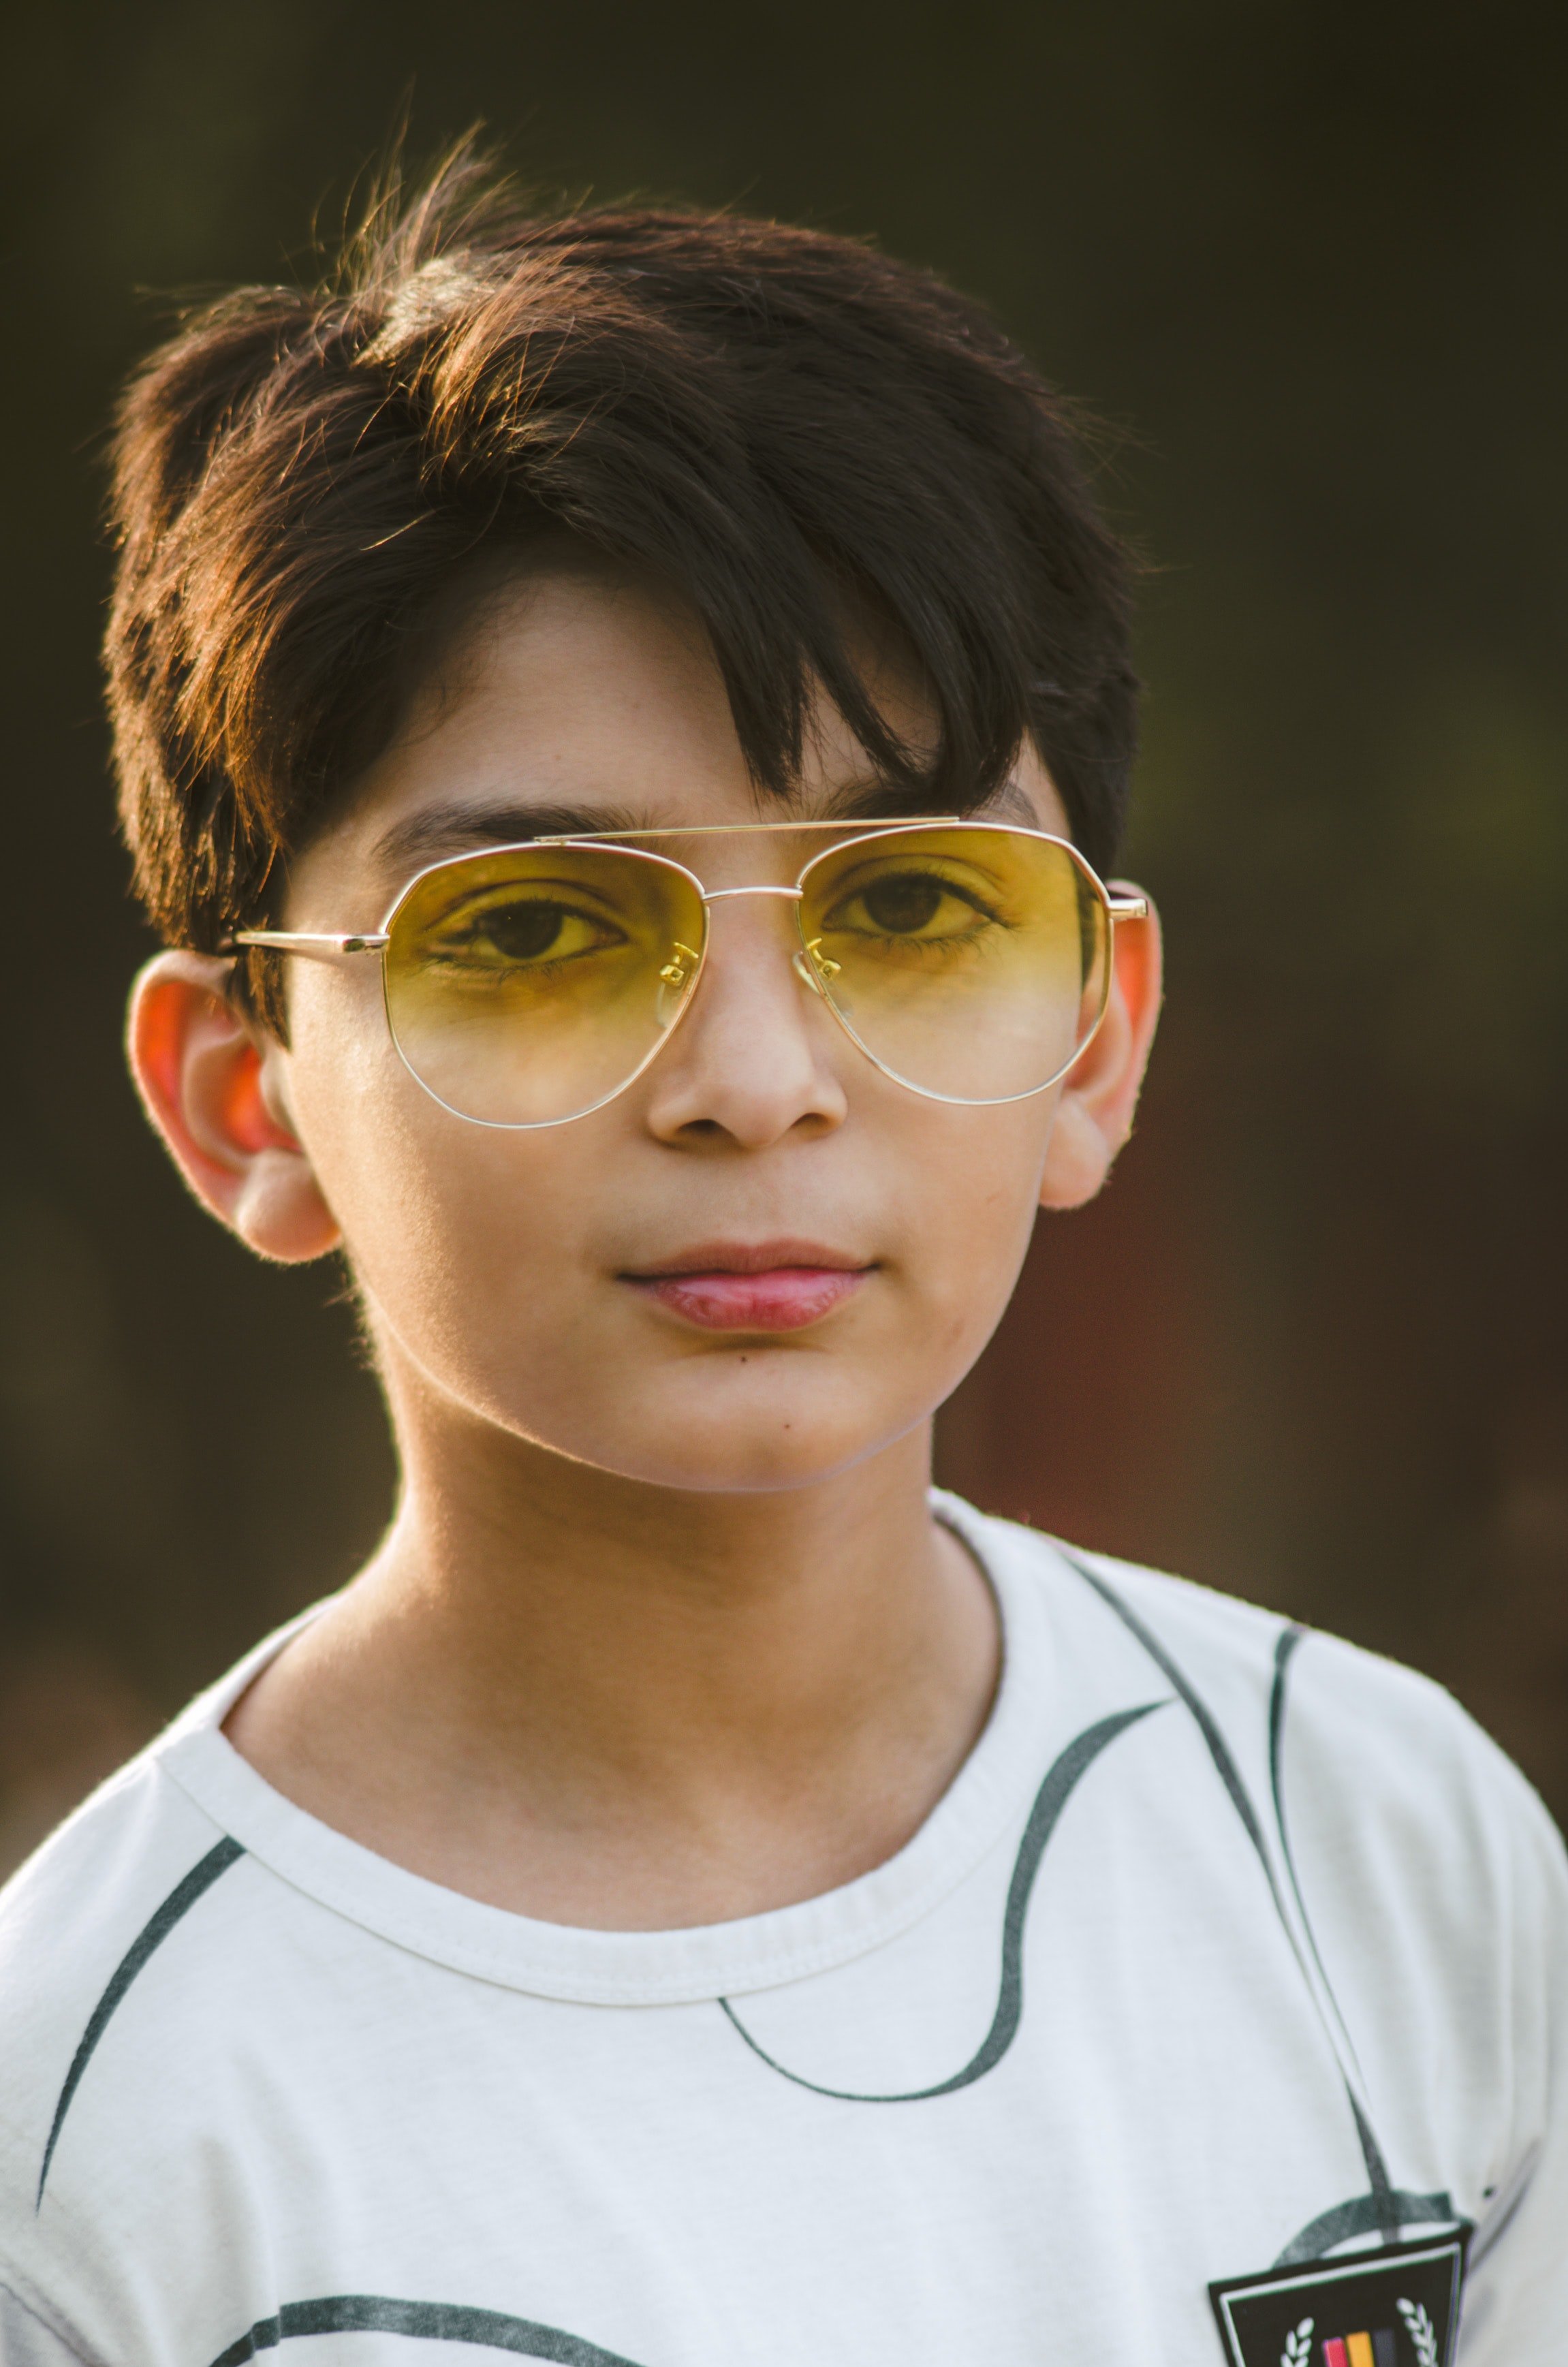 The other kids were teasing Kevin about his glasses. | Source: Unsplash